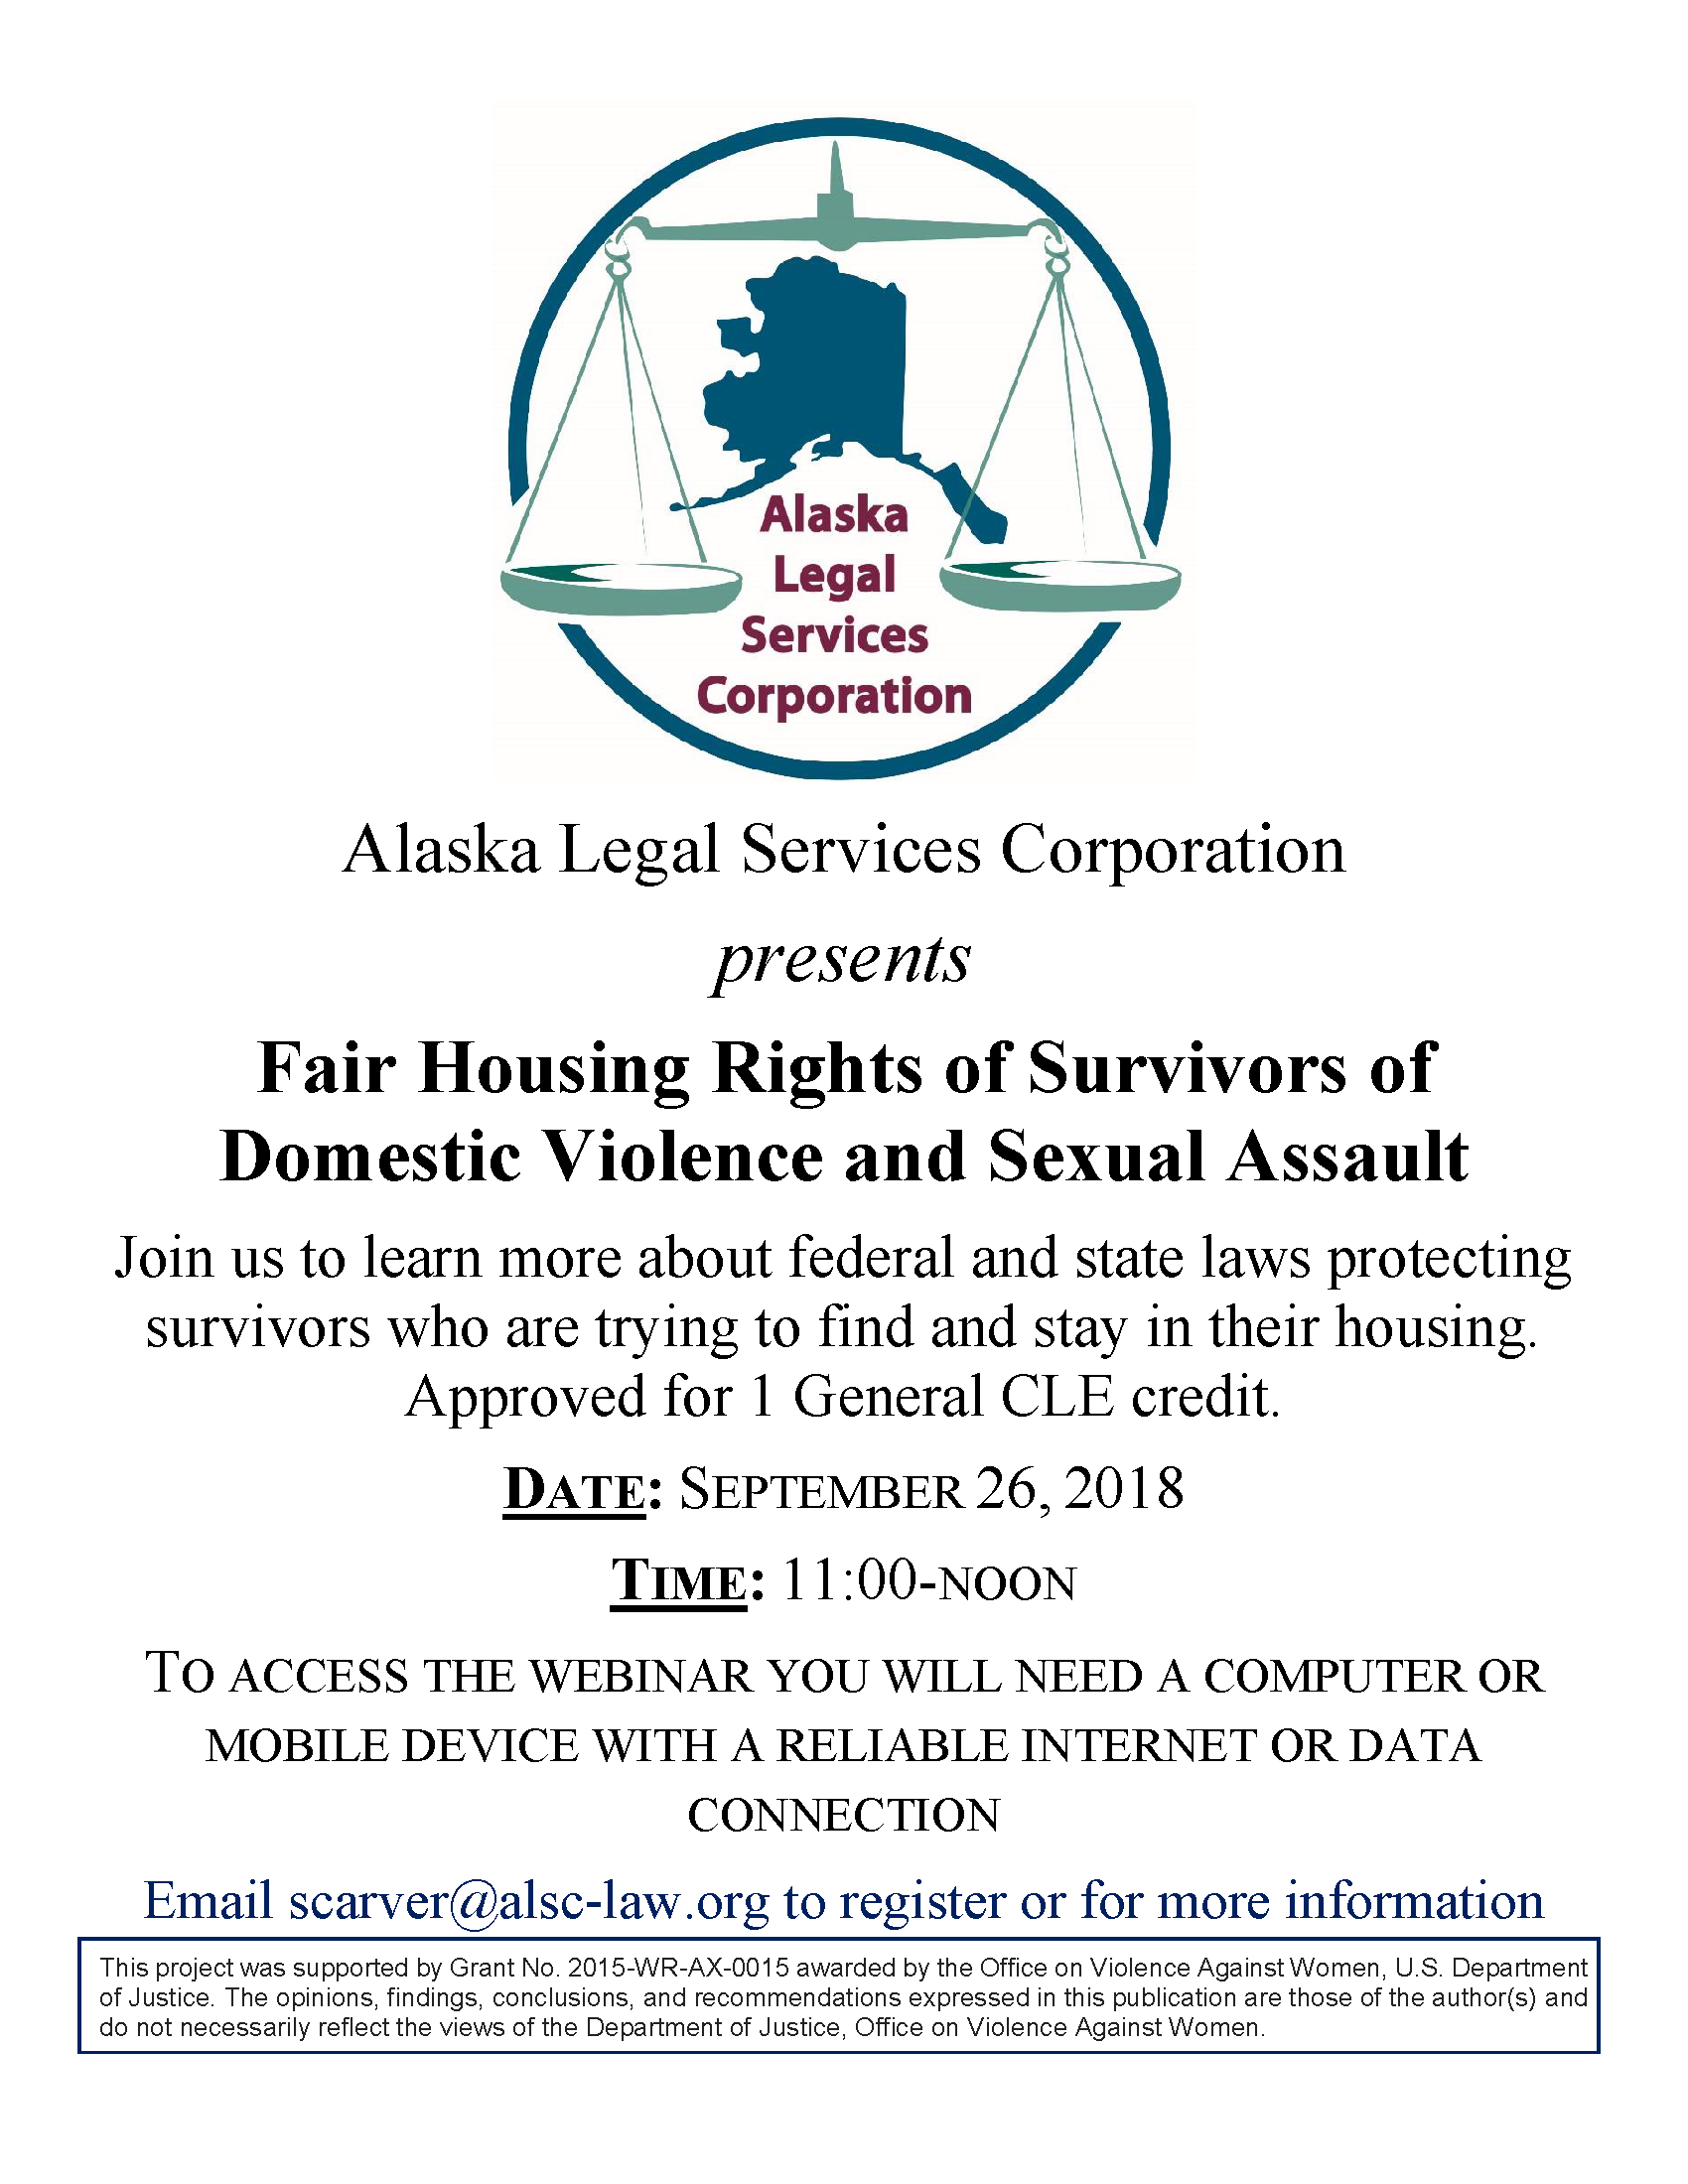 Fair Housing Rights of Survivors of Domestic Violence and Sexual Assault Webinar